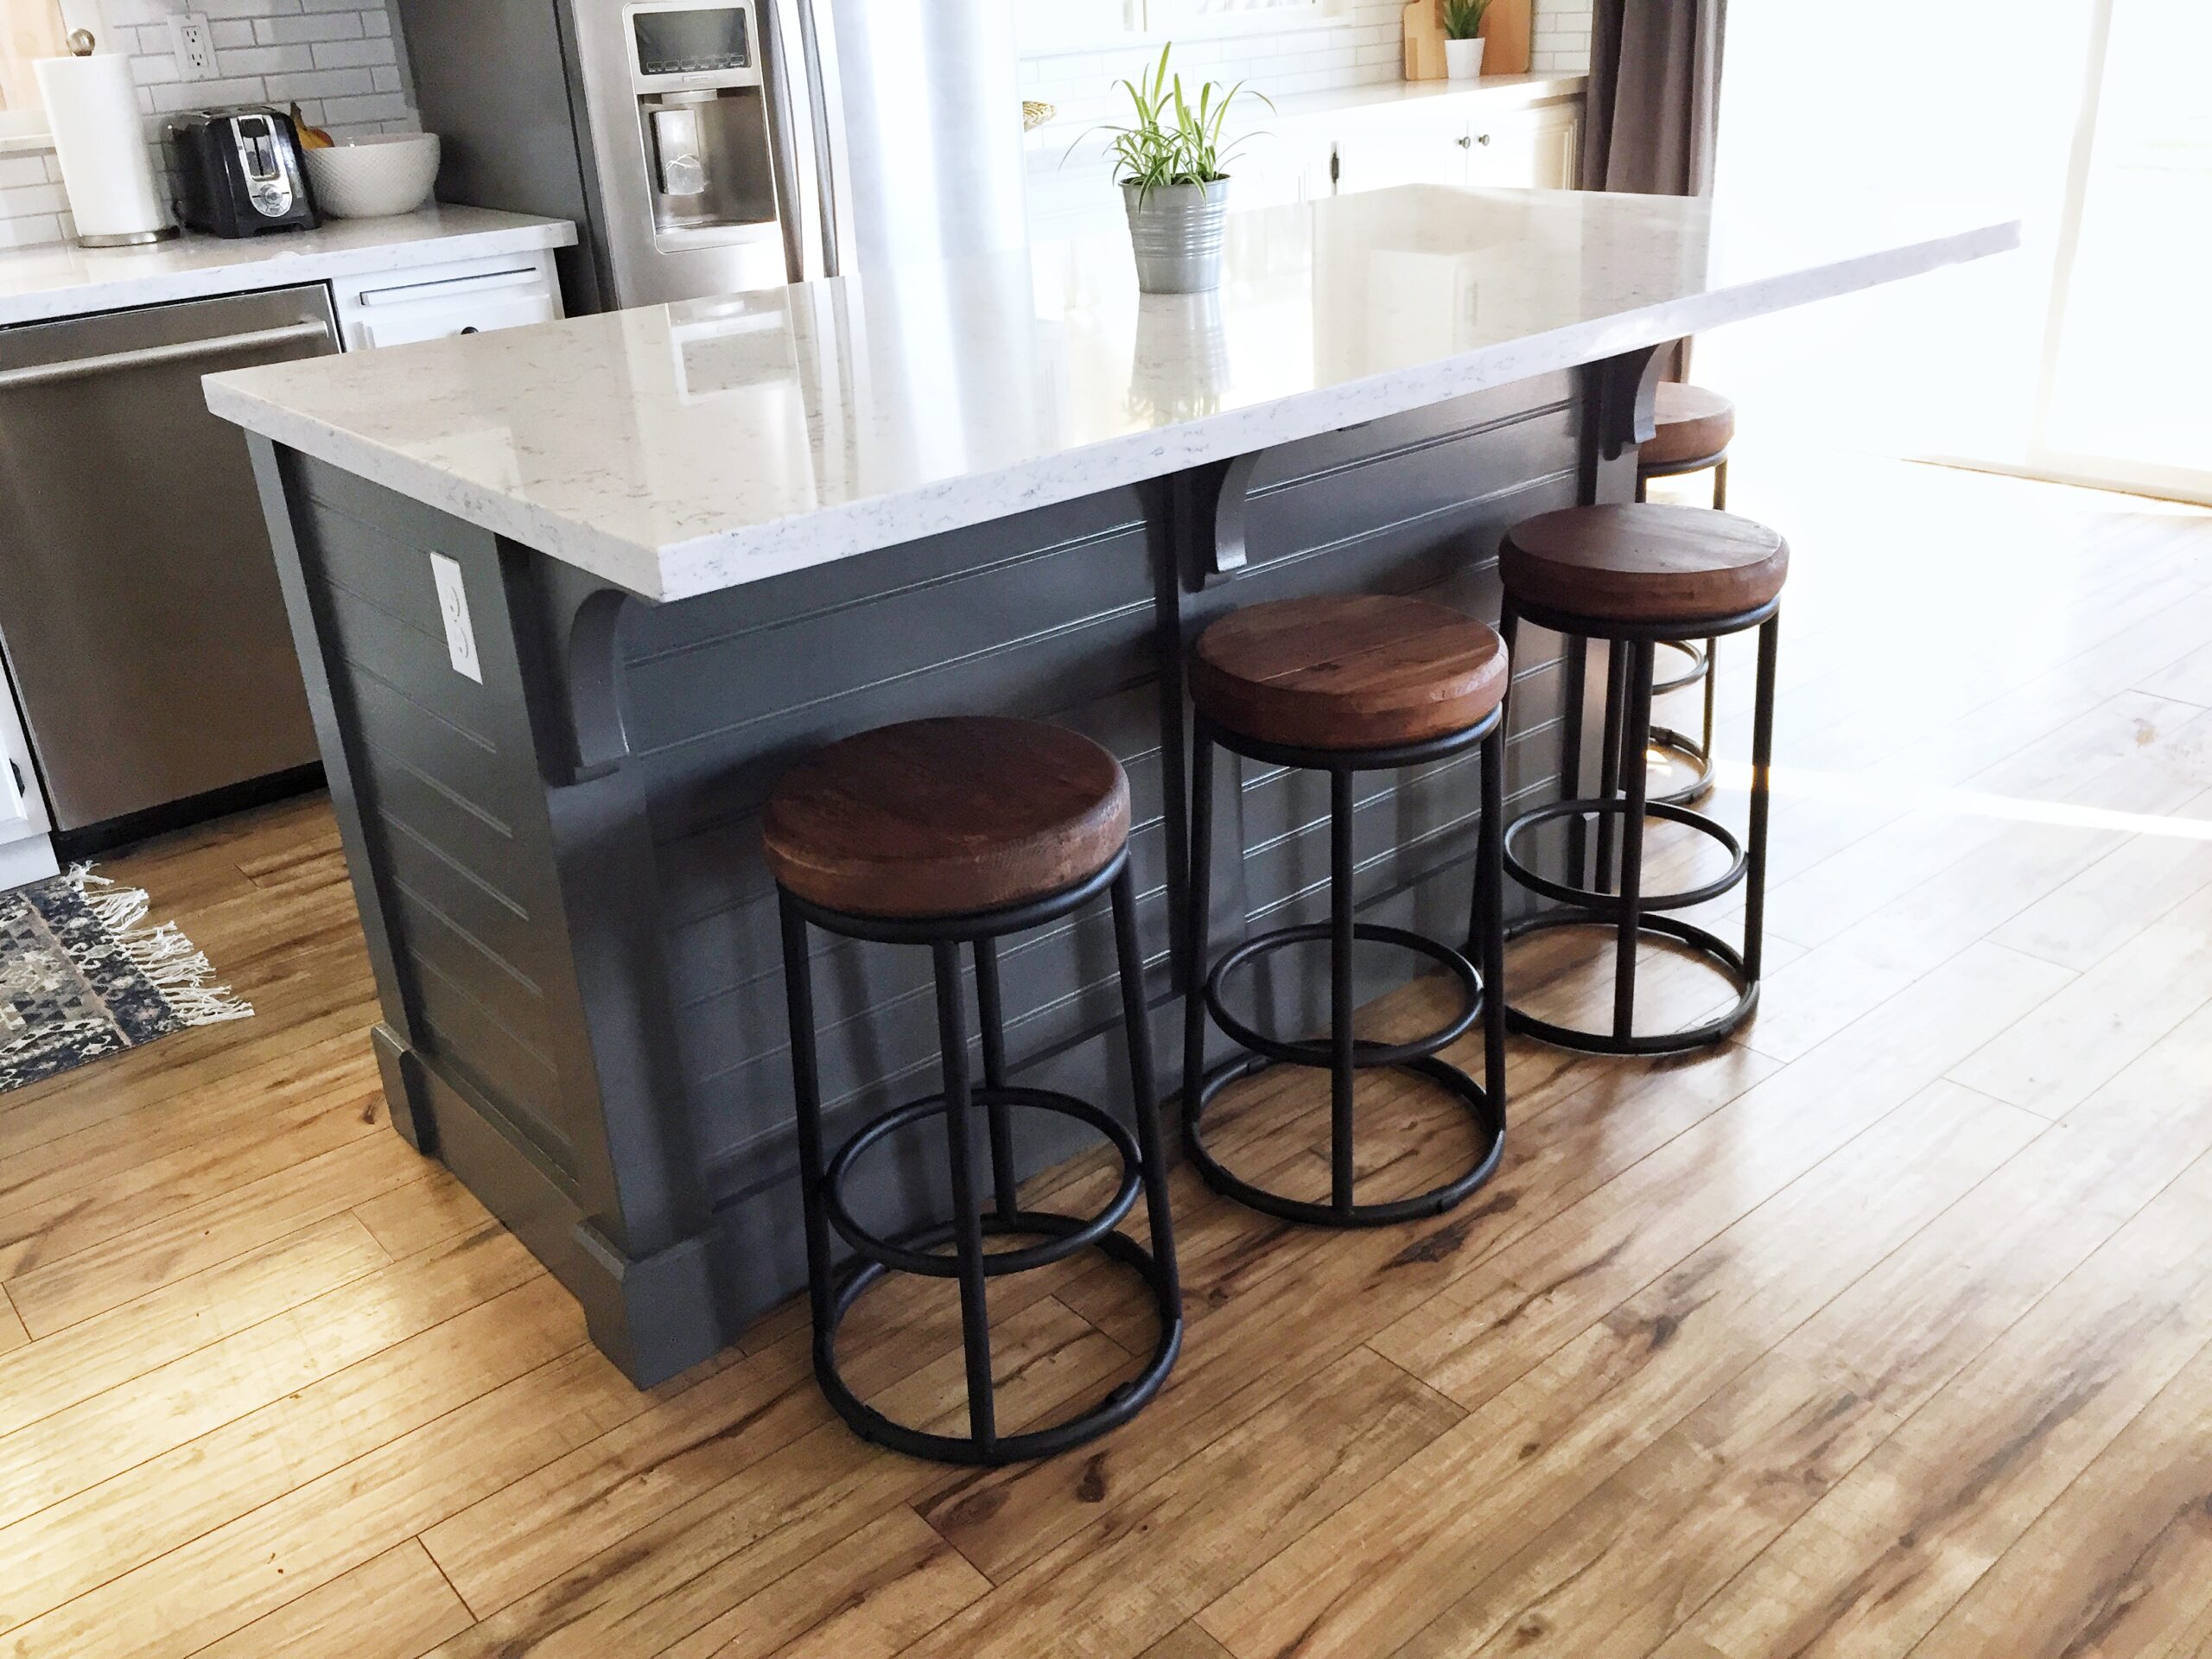 a diy kitchen island: make it yourself and save big! | domestic blonde